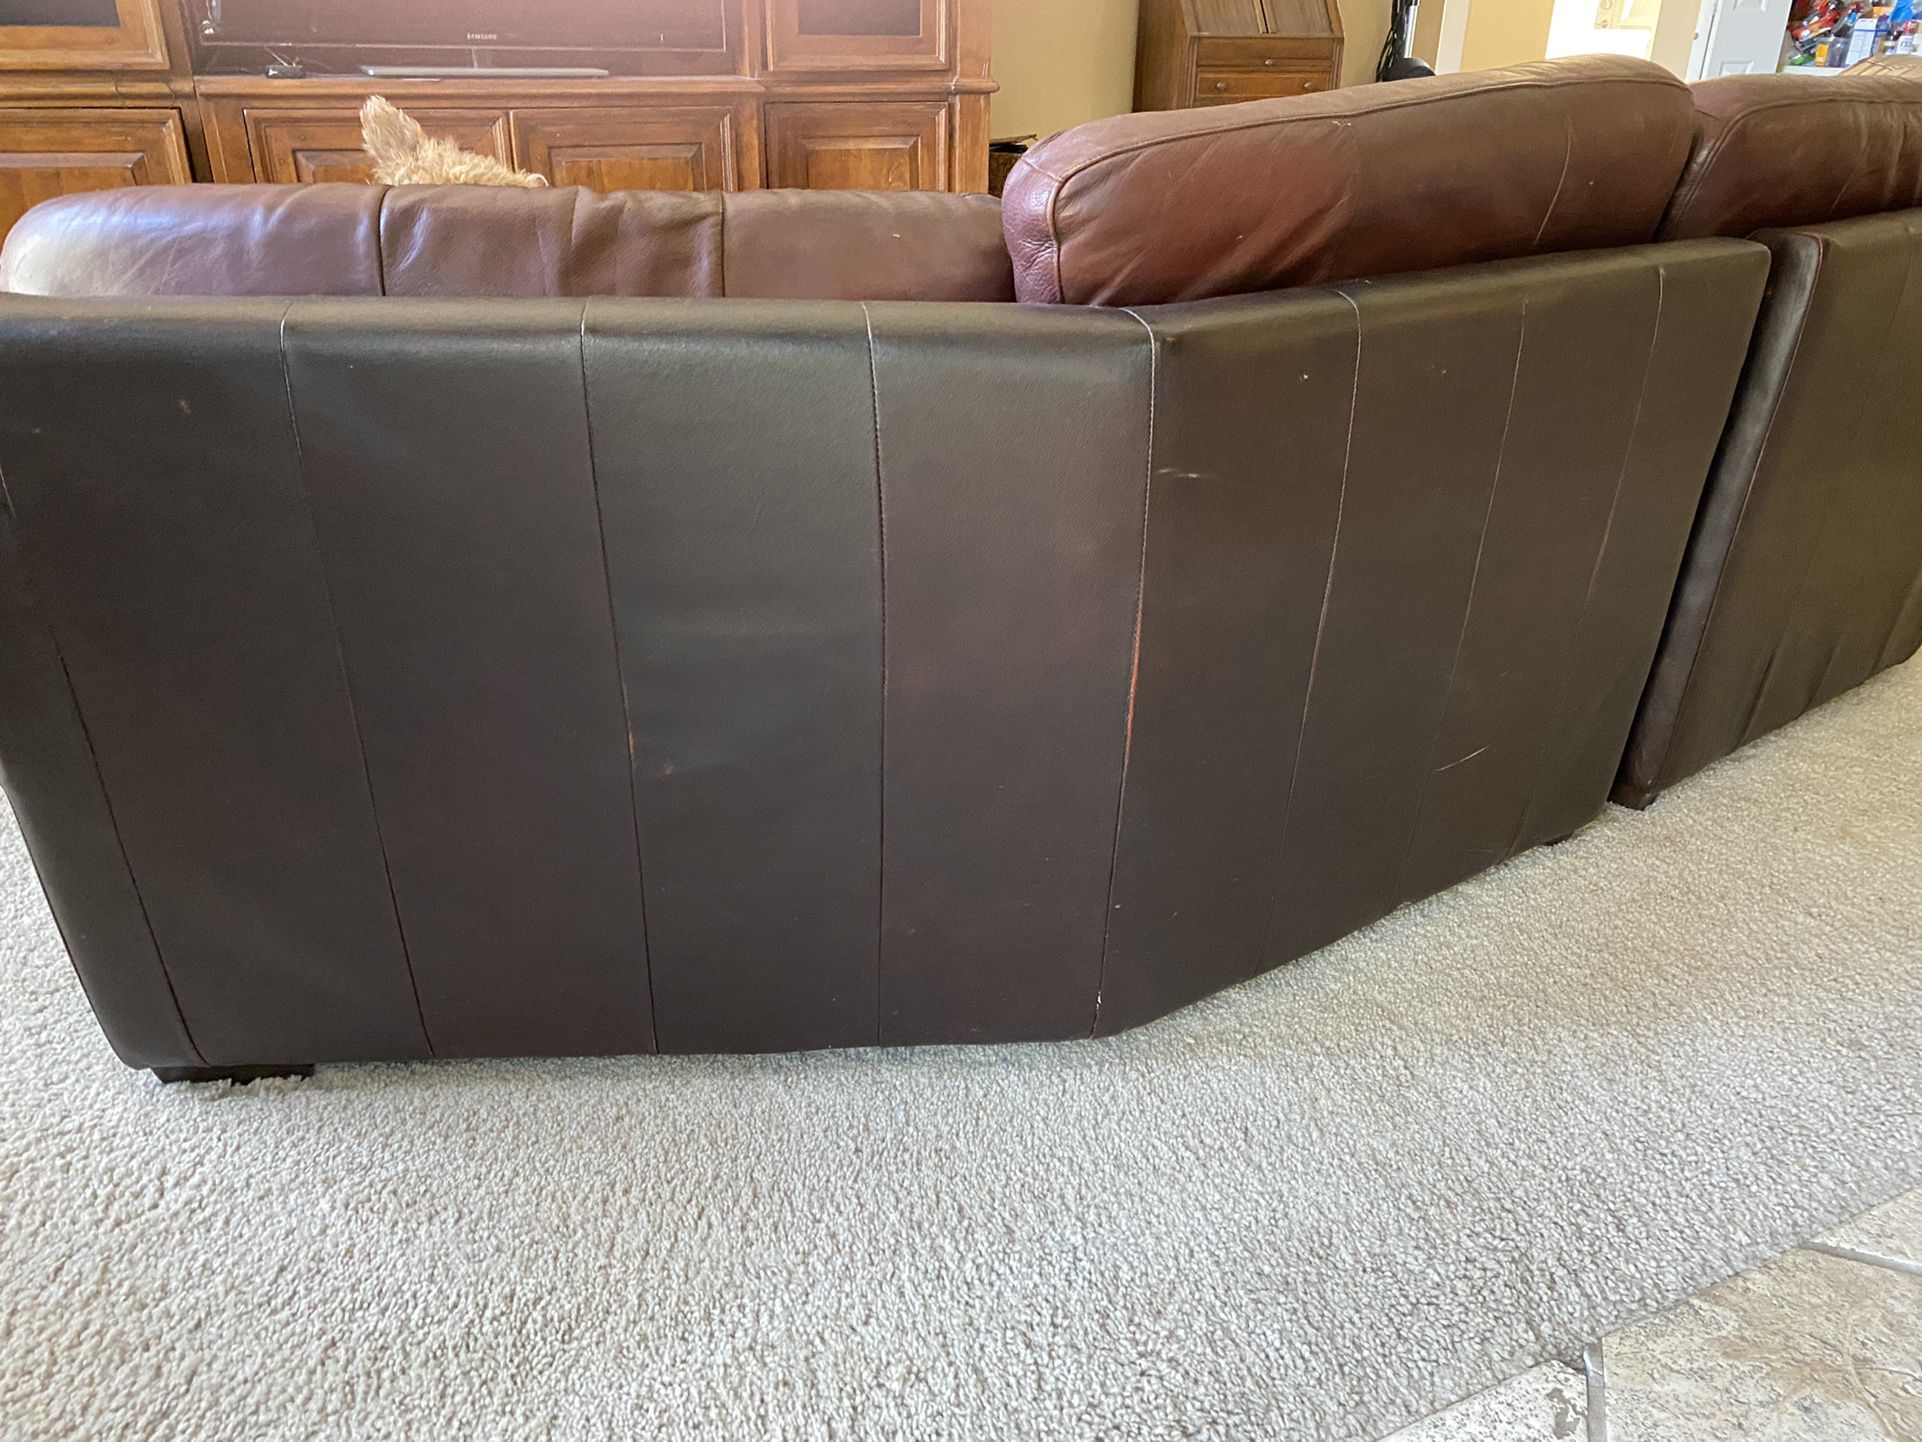 Large Leather Sectional From Macy’s (90”) Includes Ottoman. 